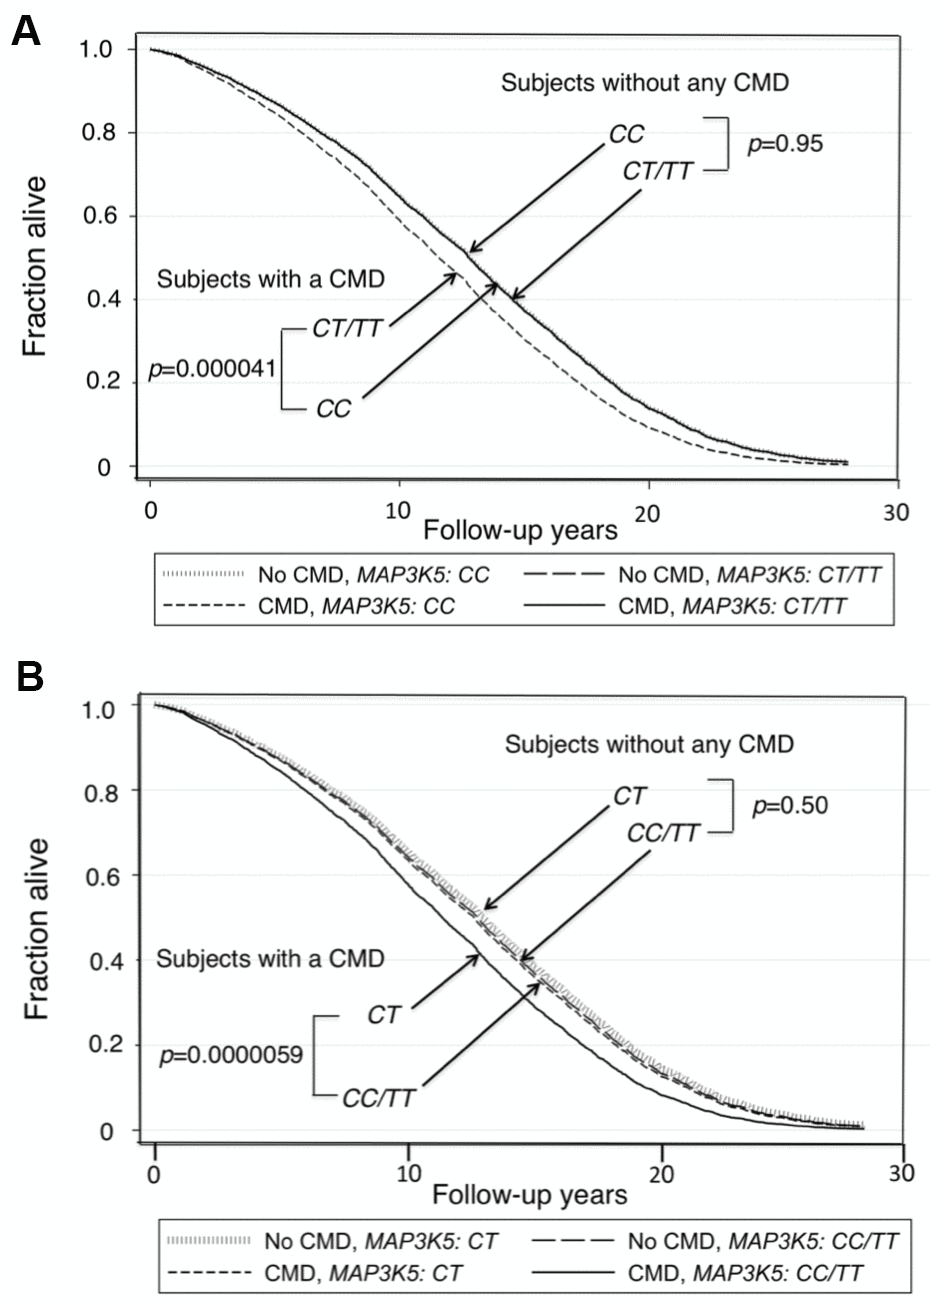 Survival curves spanning the period from baseline (1991–1993) to Dec 31, 2019 for men with and men without a CMD according to genotypes of MAP3K5 SNP rs2076260. The survival probabilities were estimated from the Cox proportional hazard model: h(t) = h(t0) * exp(β1*Age + β2*BMI + β3*Glucose + β4*CMD + β5*MAP3K5